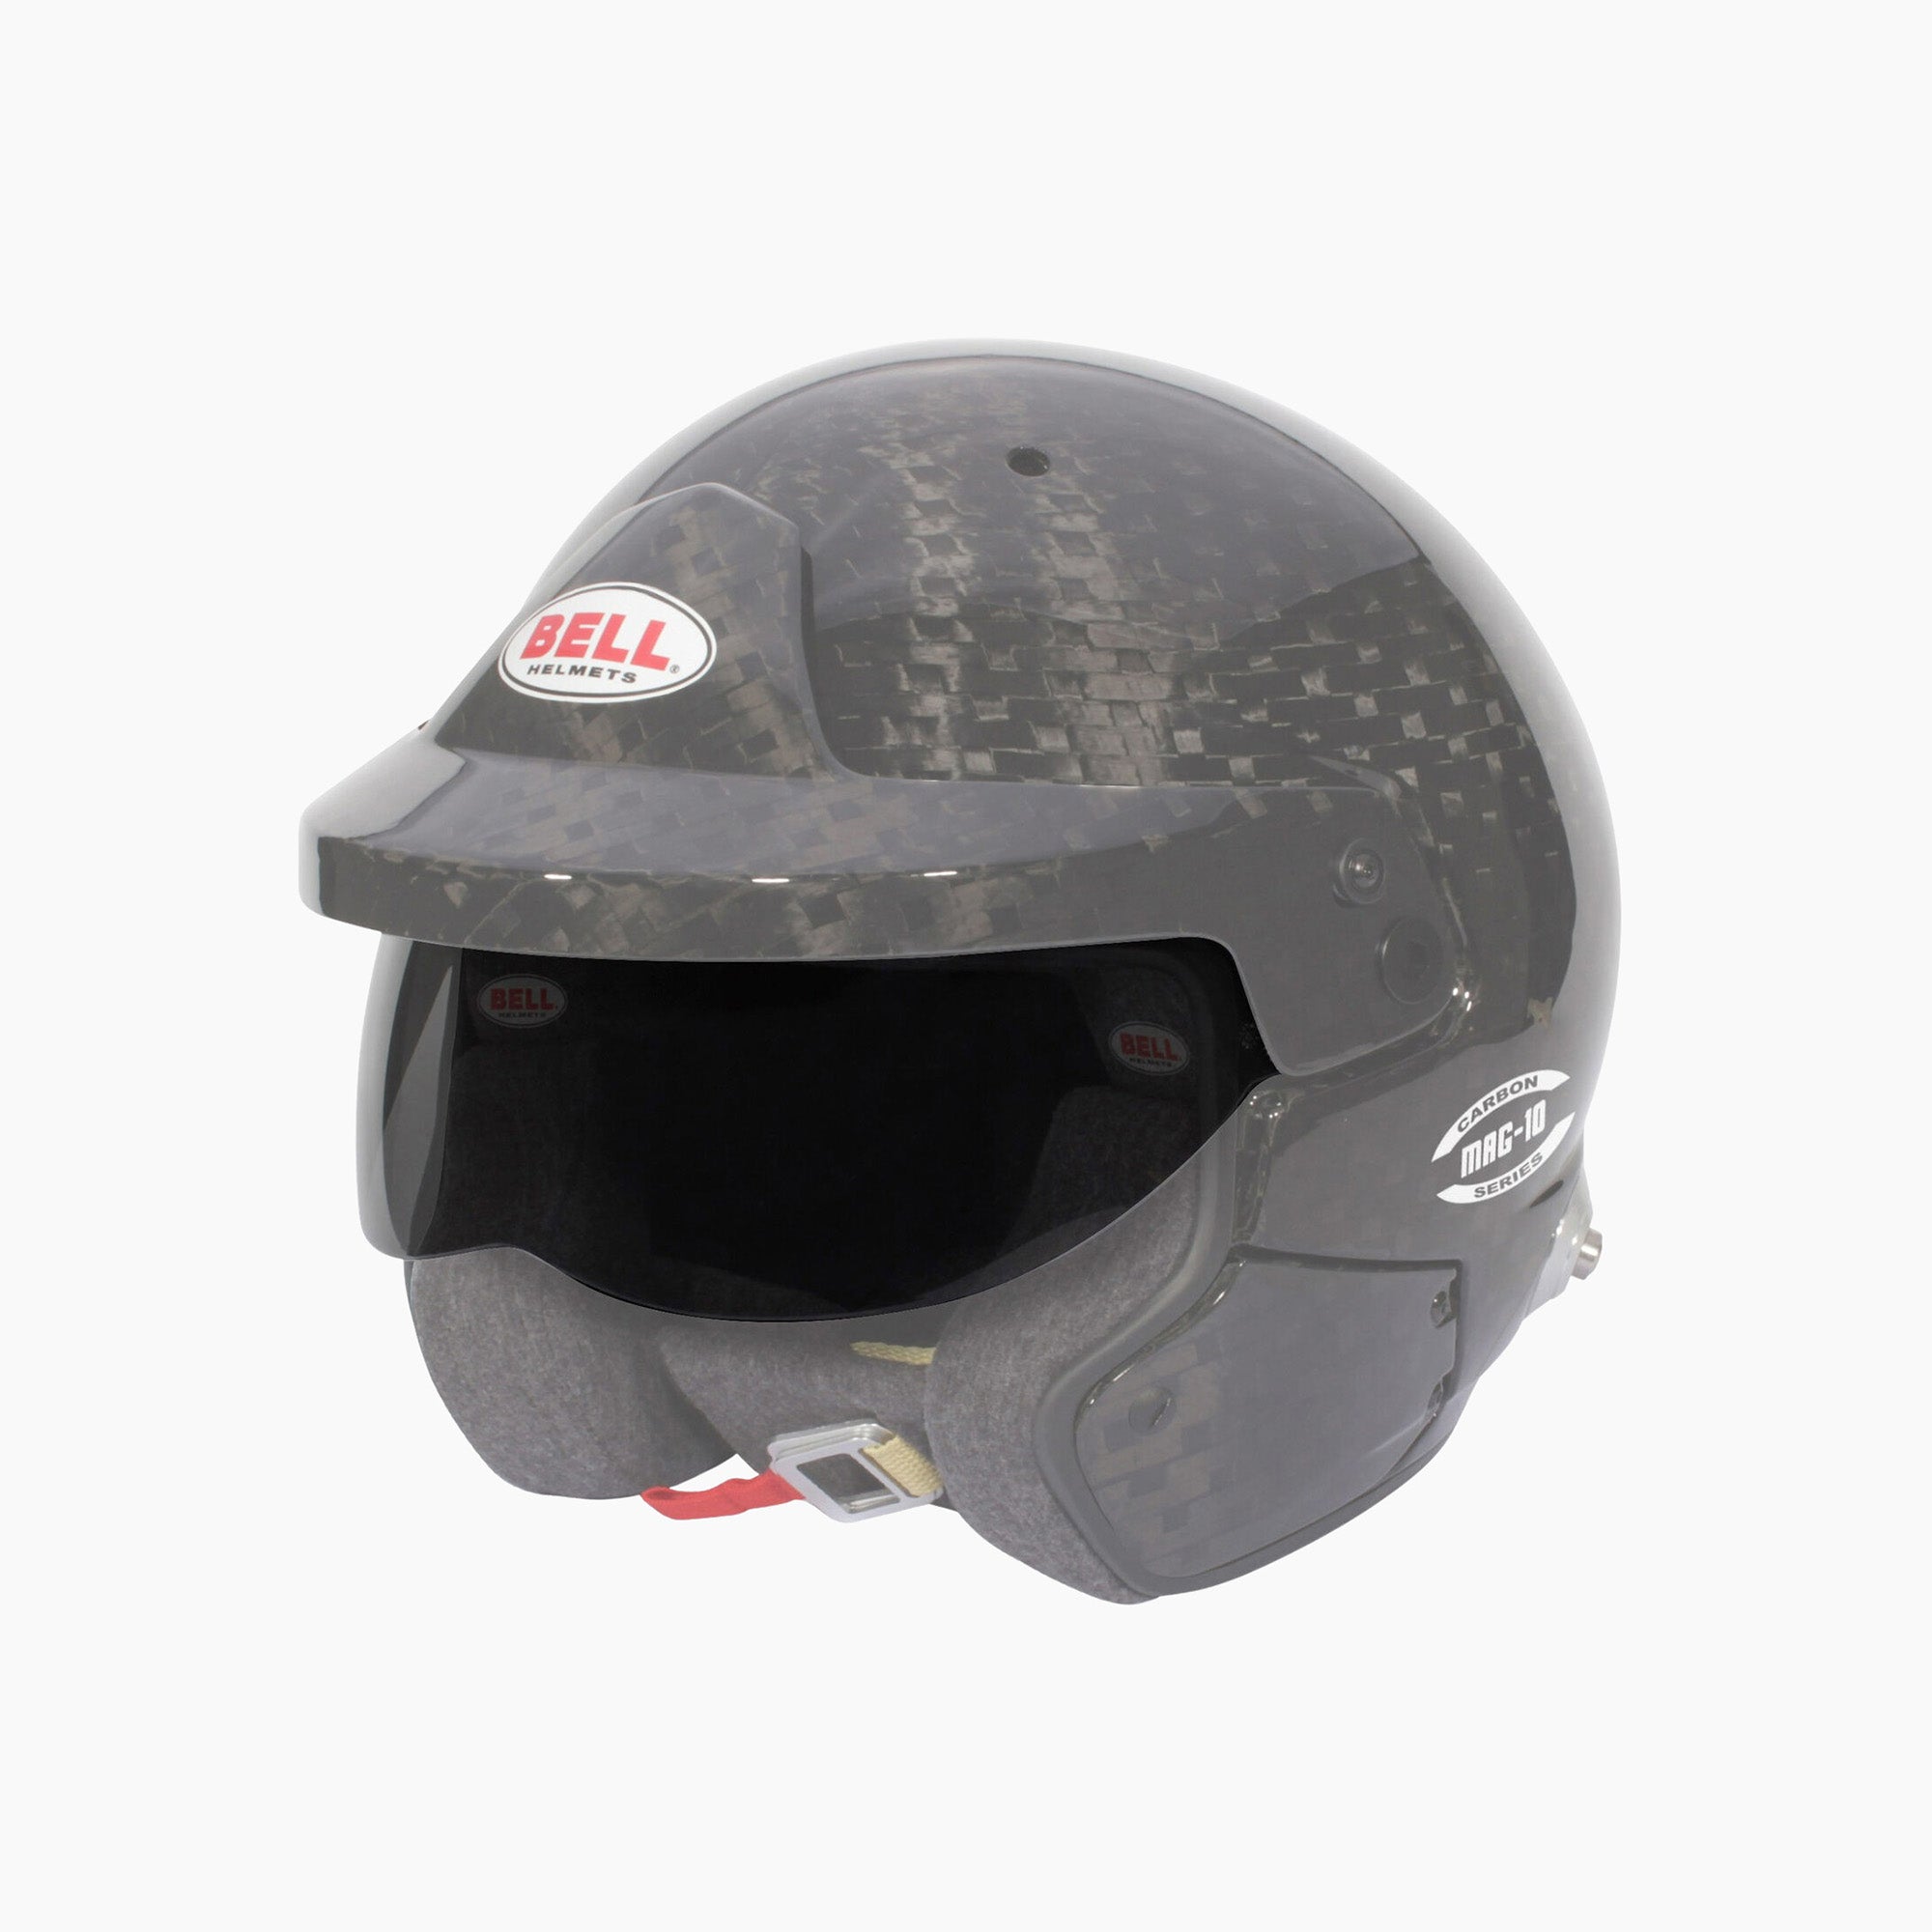 Bell Racing | HP10 Racing Helmet-Racing Helmet-Bell Racing-gpx-store